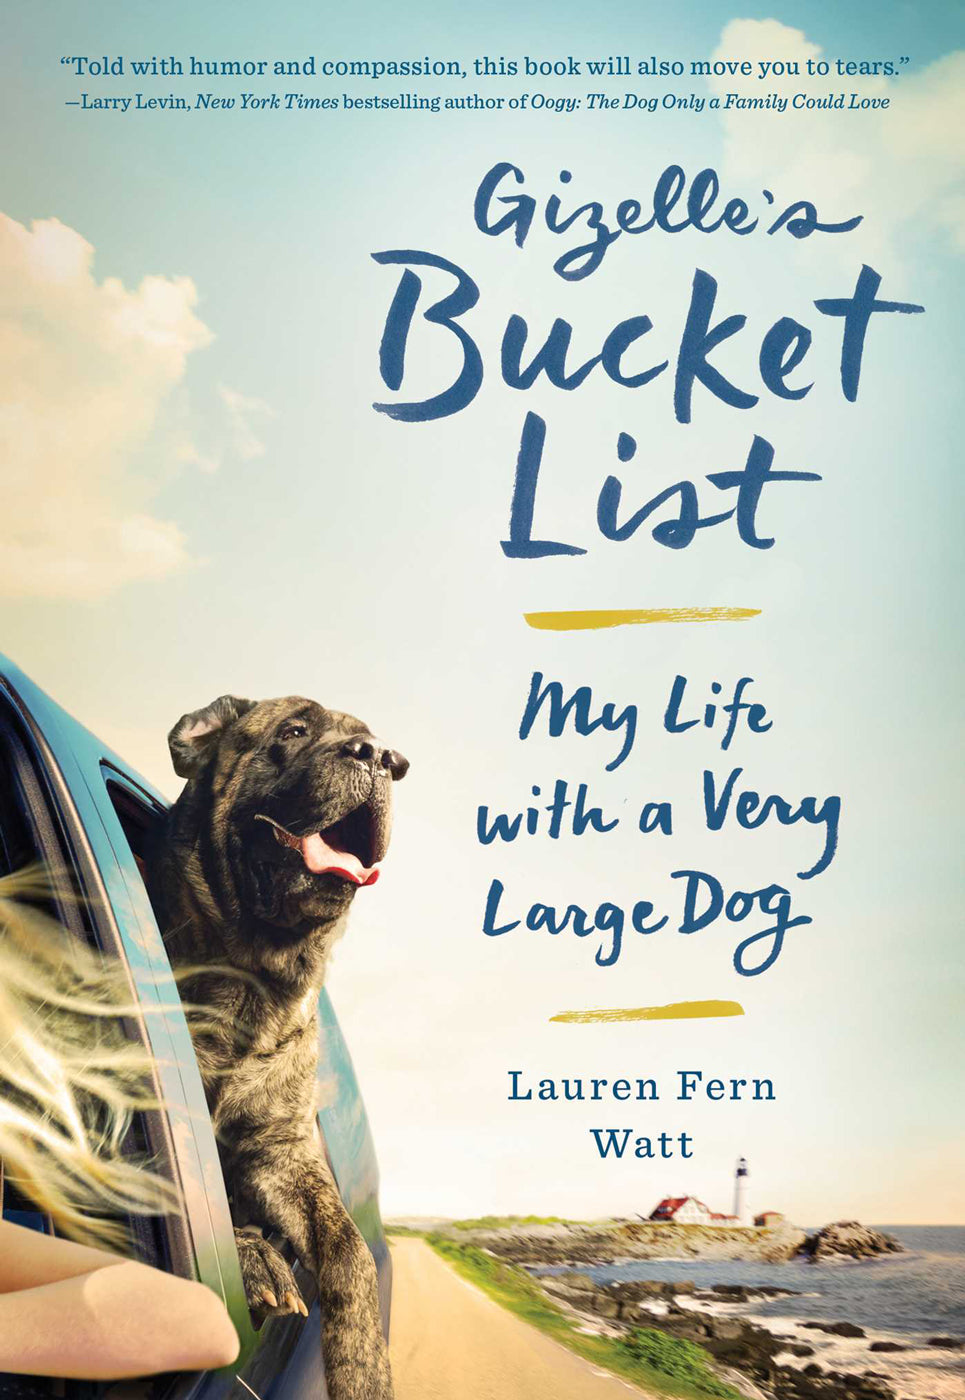 Gizelle's Bucket List - My Life with a Very Large Dog